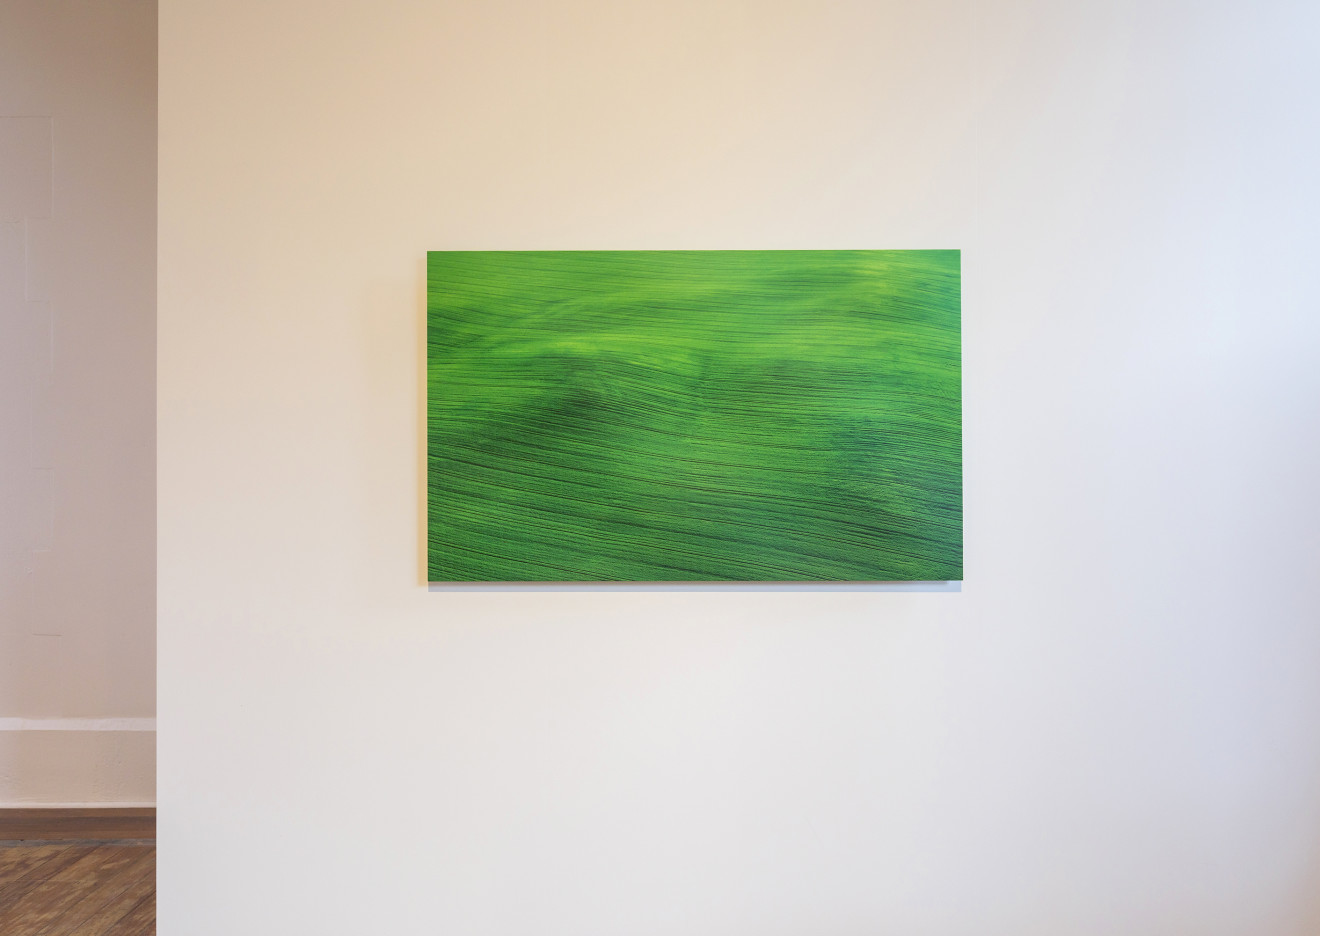 Elizabeth Thomson, Green Just Lies There Awhile Breathing, Long Slow Breaths, 2019